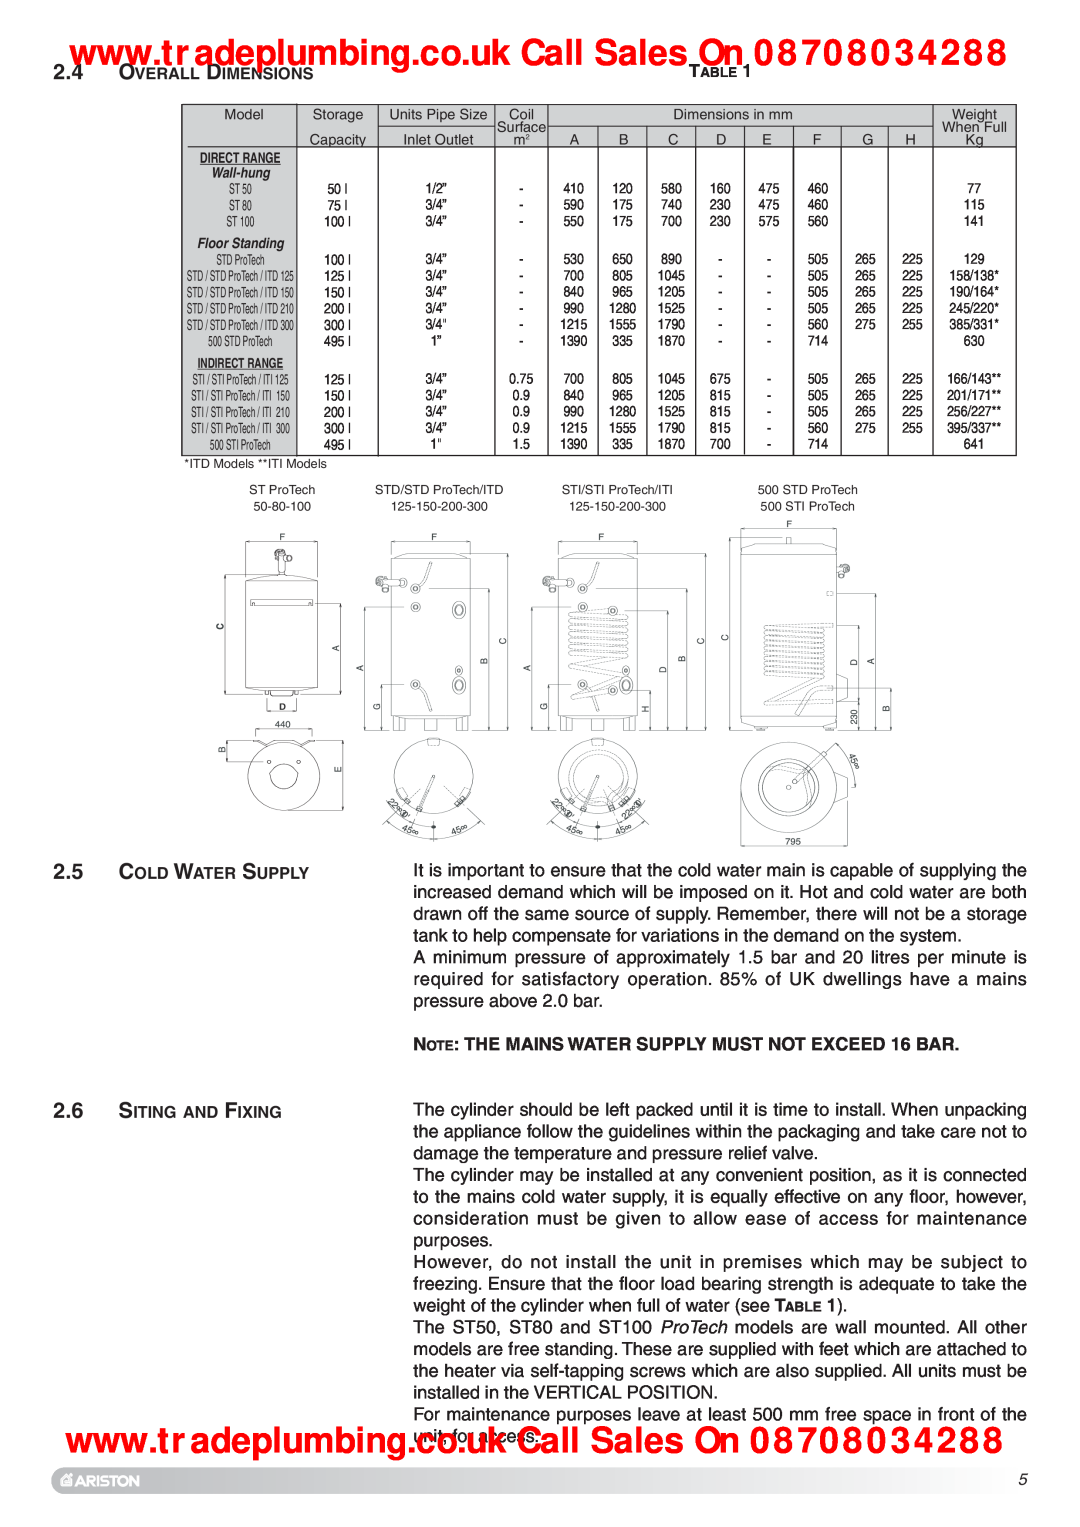 Ariston Unvented Hot Water Storage Cylinders manual NOTE THE MAINS WATER SUPPLY MUST NOT EXCEED 16 BAR, Overall Dimensions 